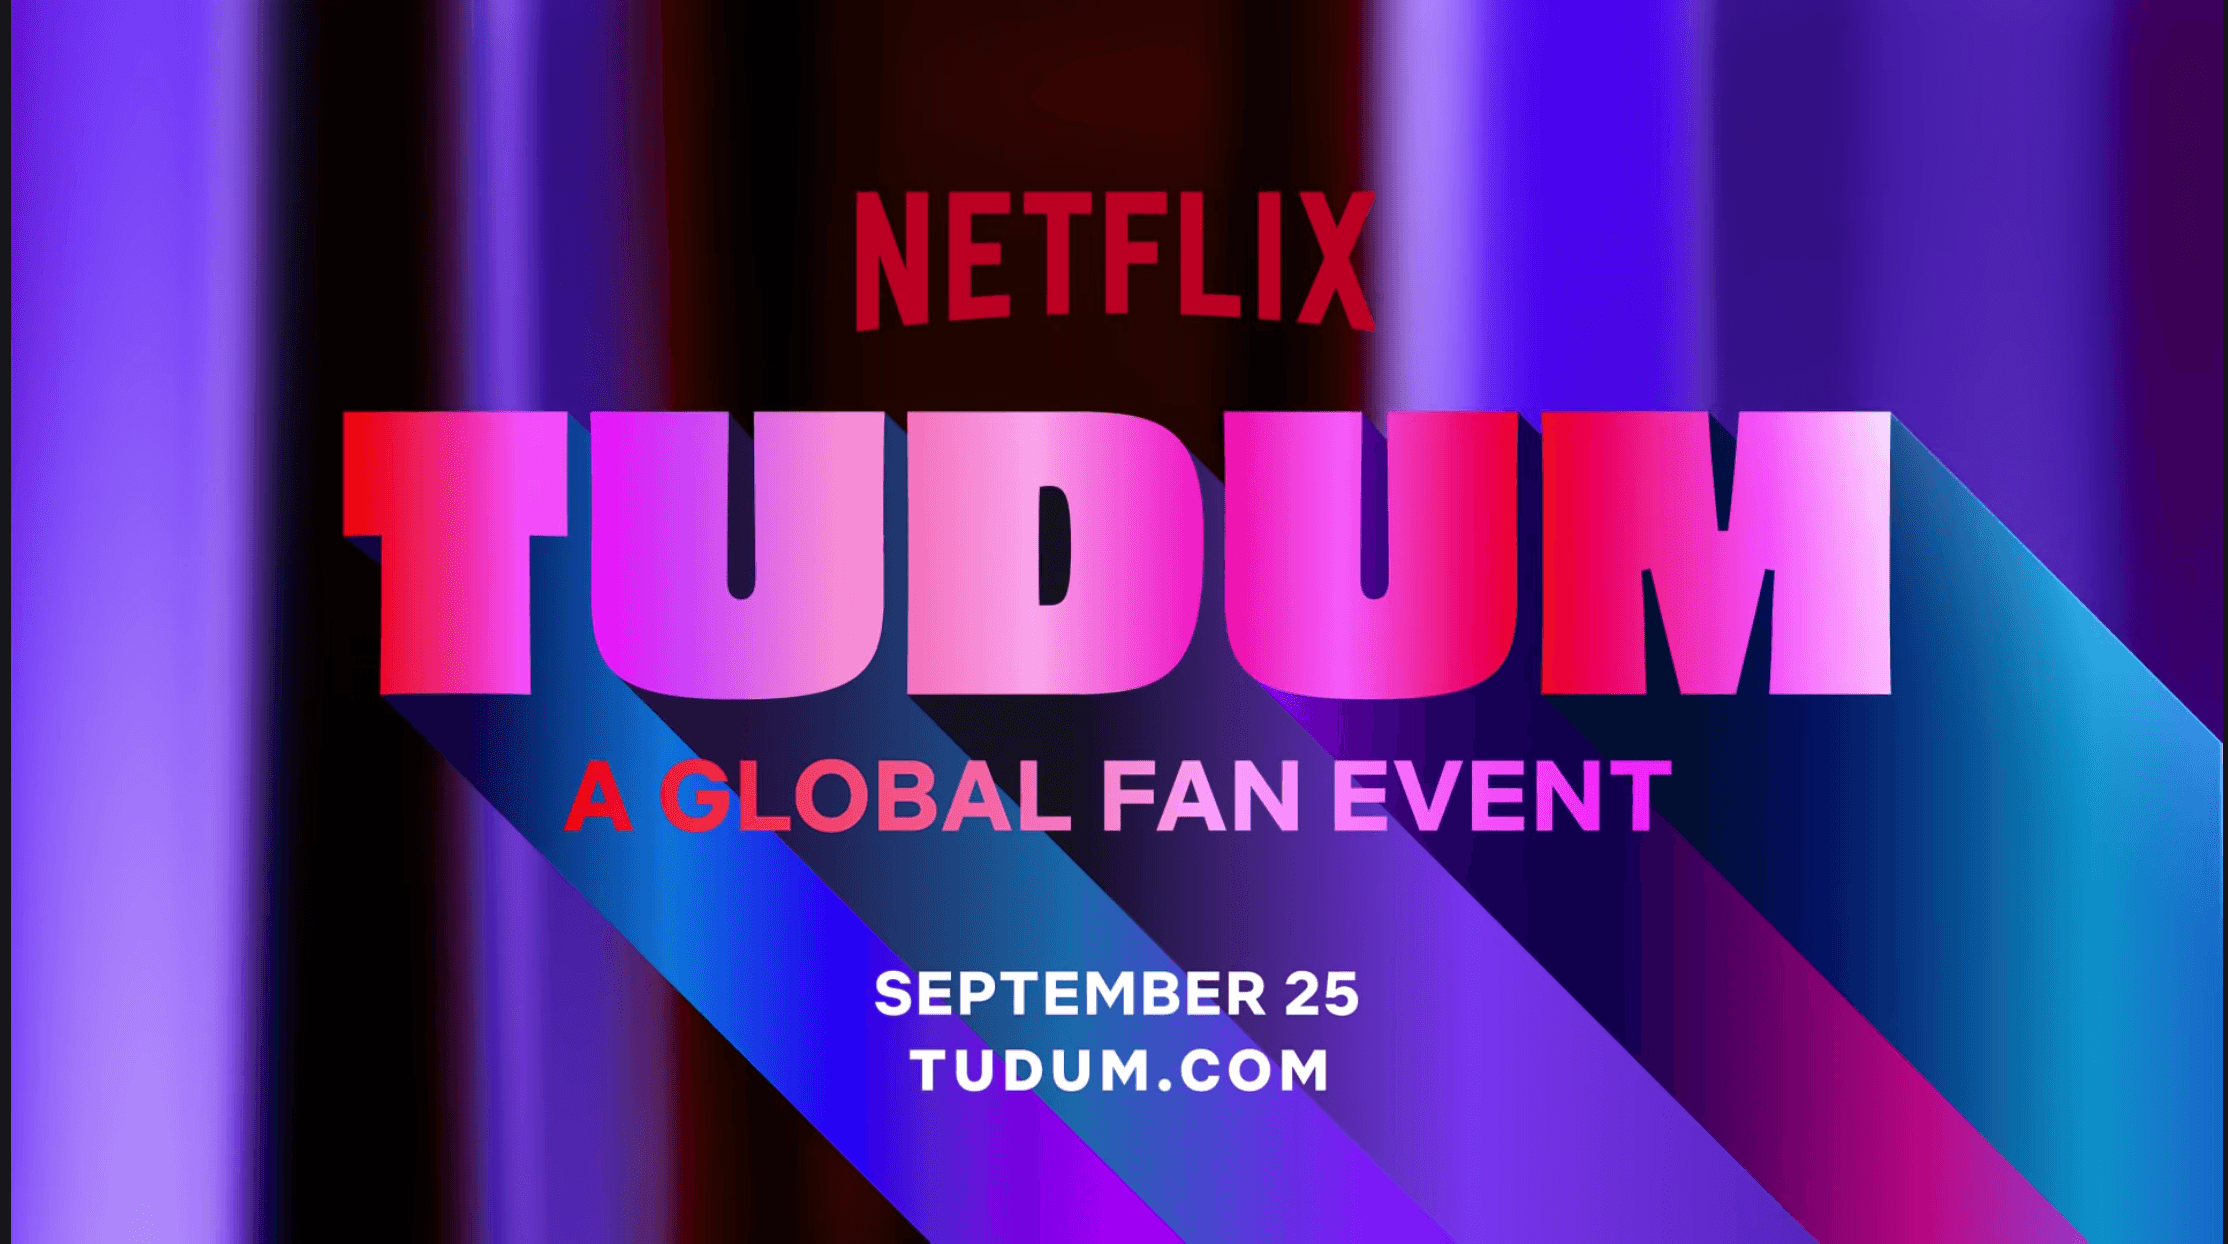 Netflix’s Virtual Fan Event ‘Tudum’ is Saturday, Sept. 25 – Here’s the Full Schedule